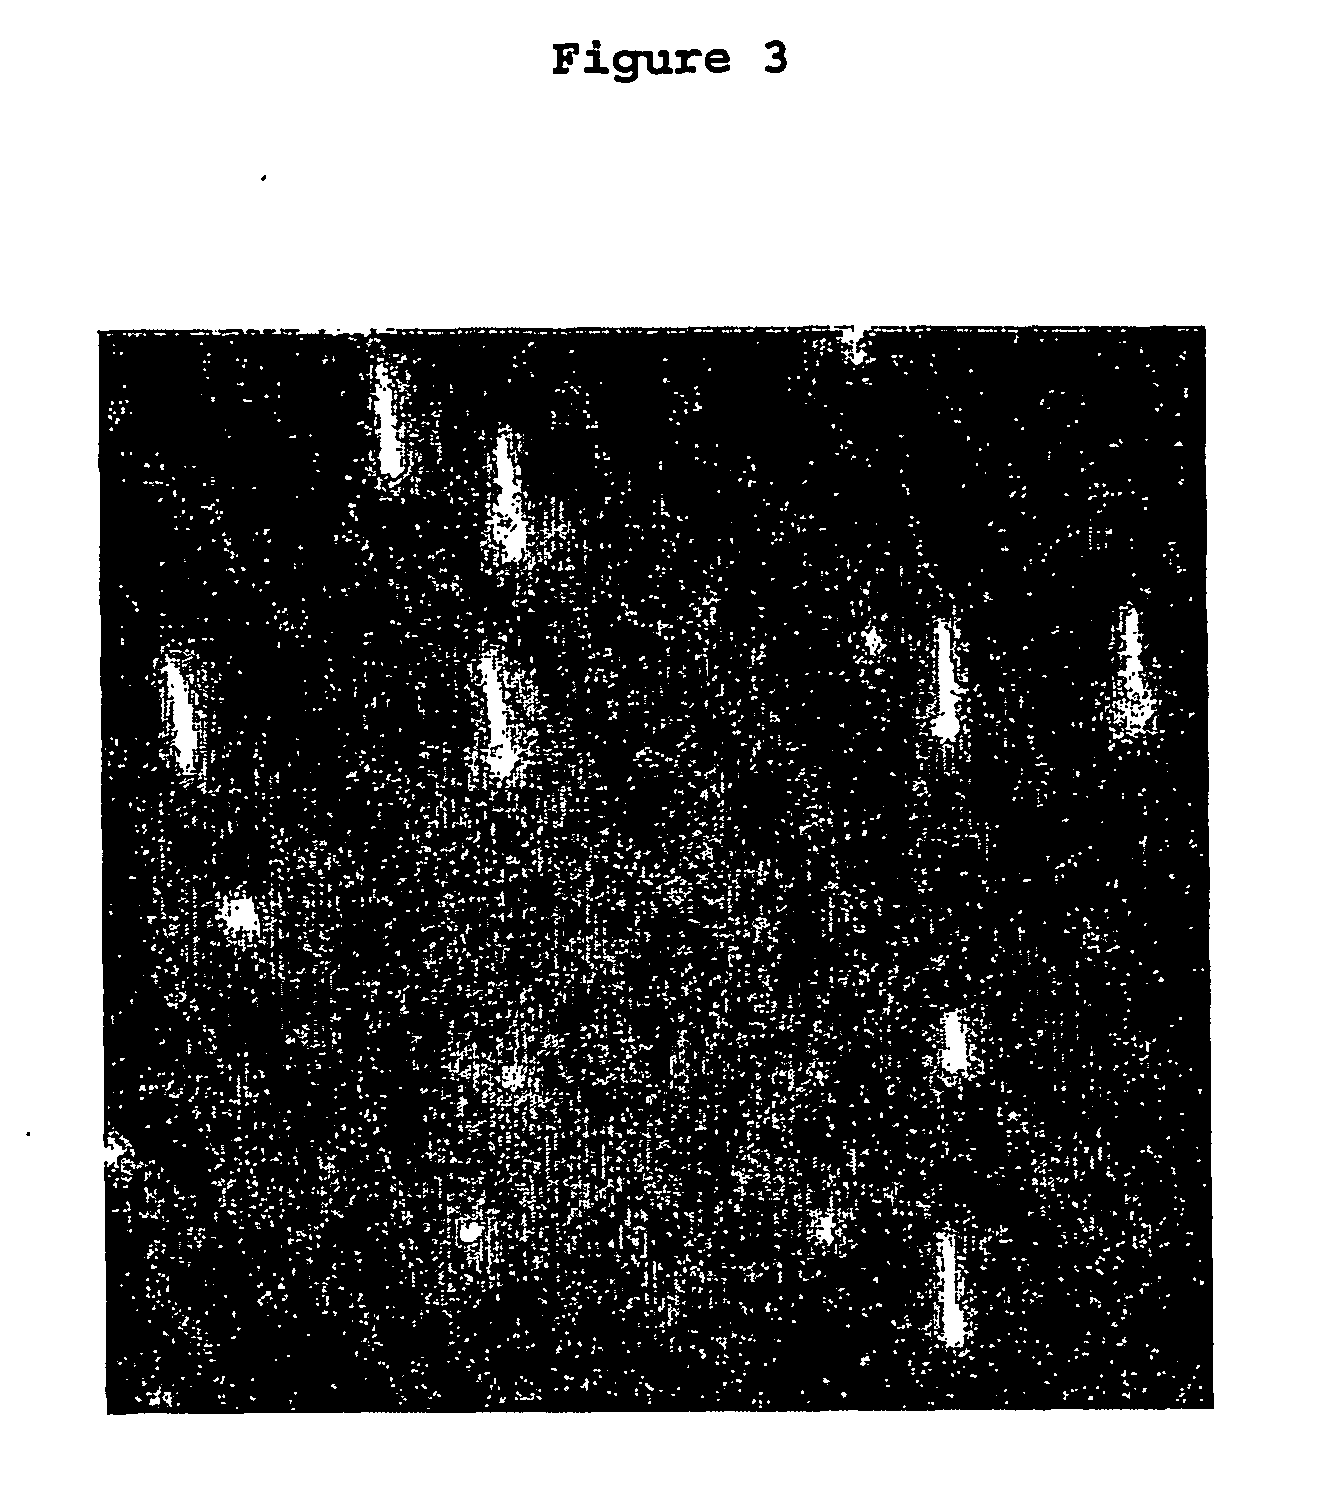 Methods for detection and quantification of analytes in complex mixtures